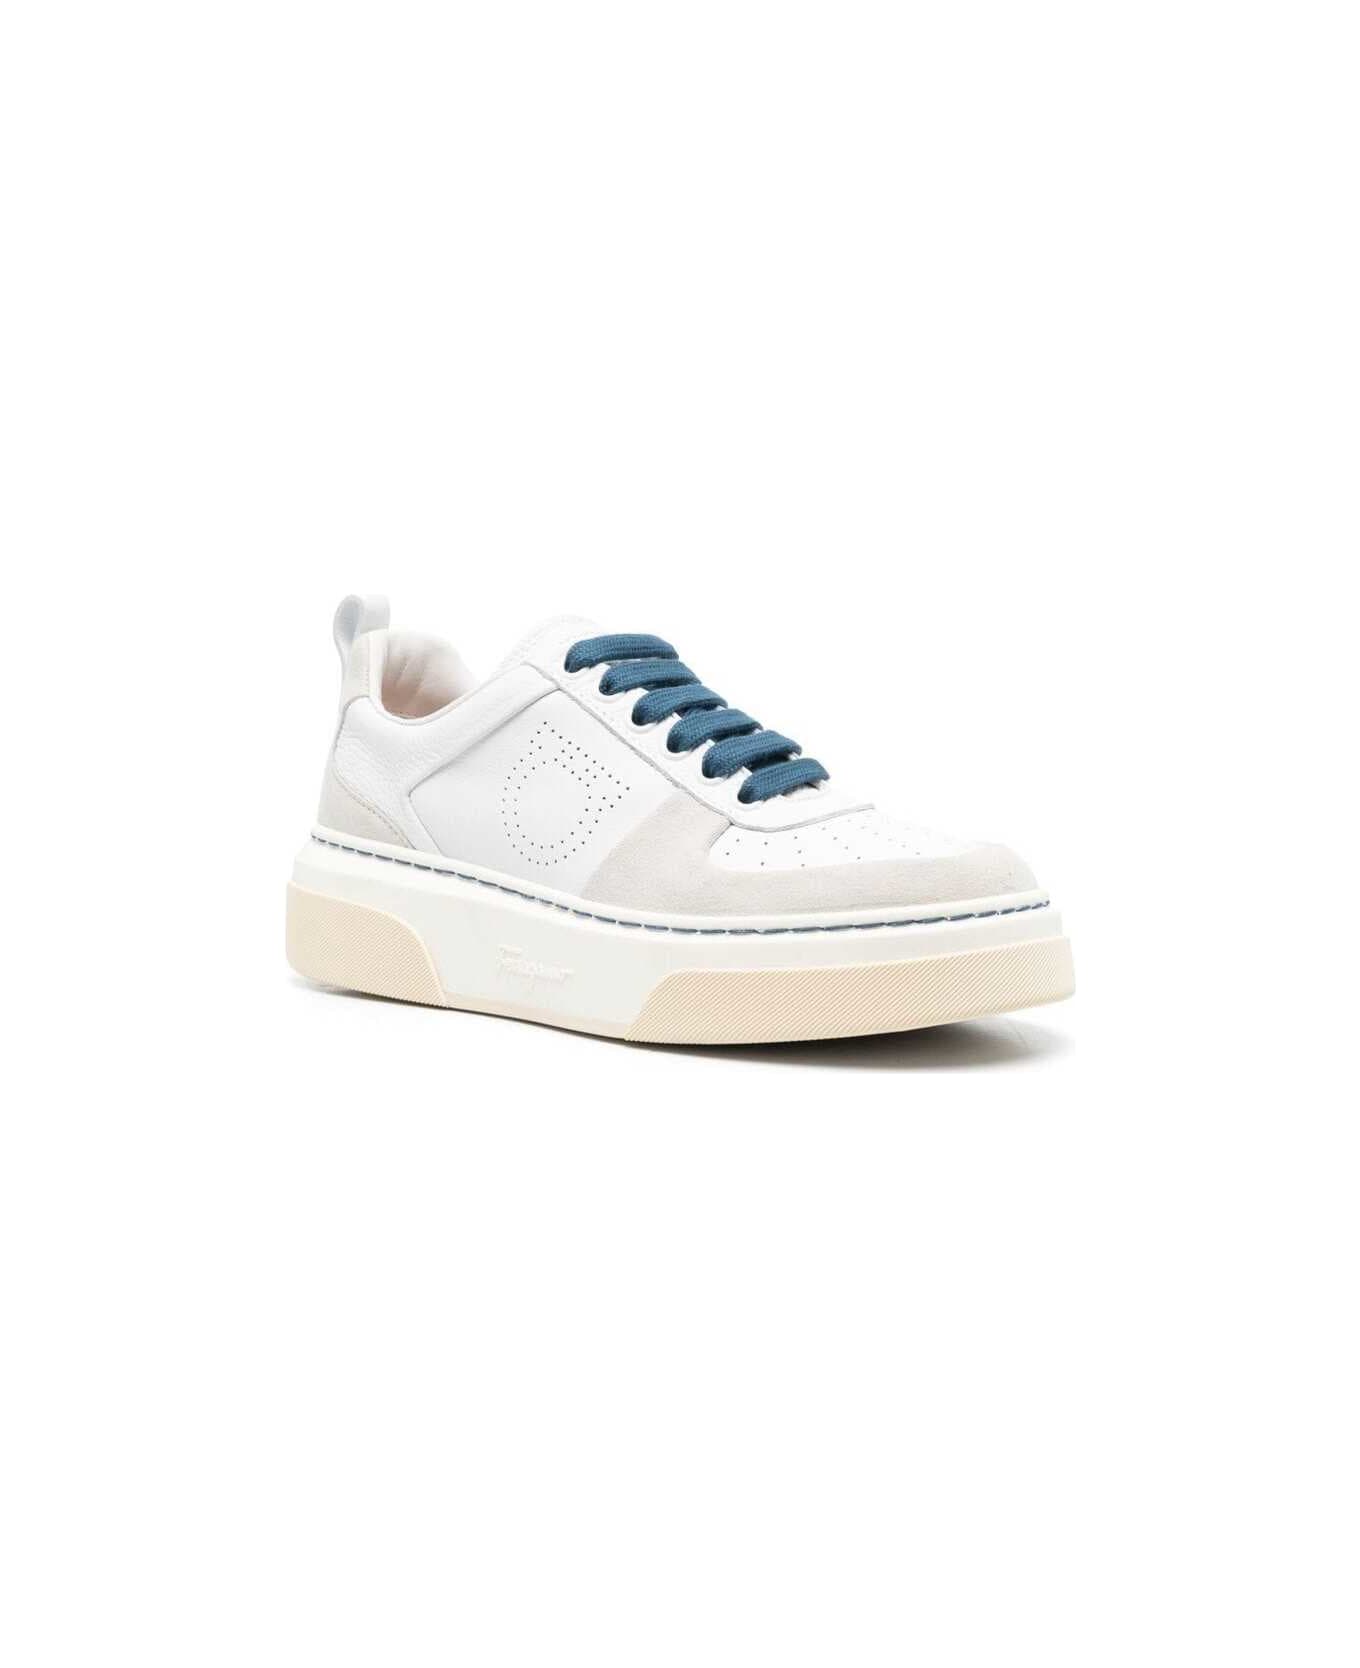 Ferragamo White Cassina Low Top Sneakers In Suede Leather Woman - White